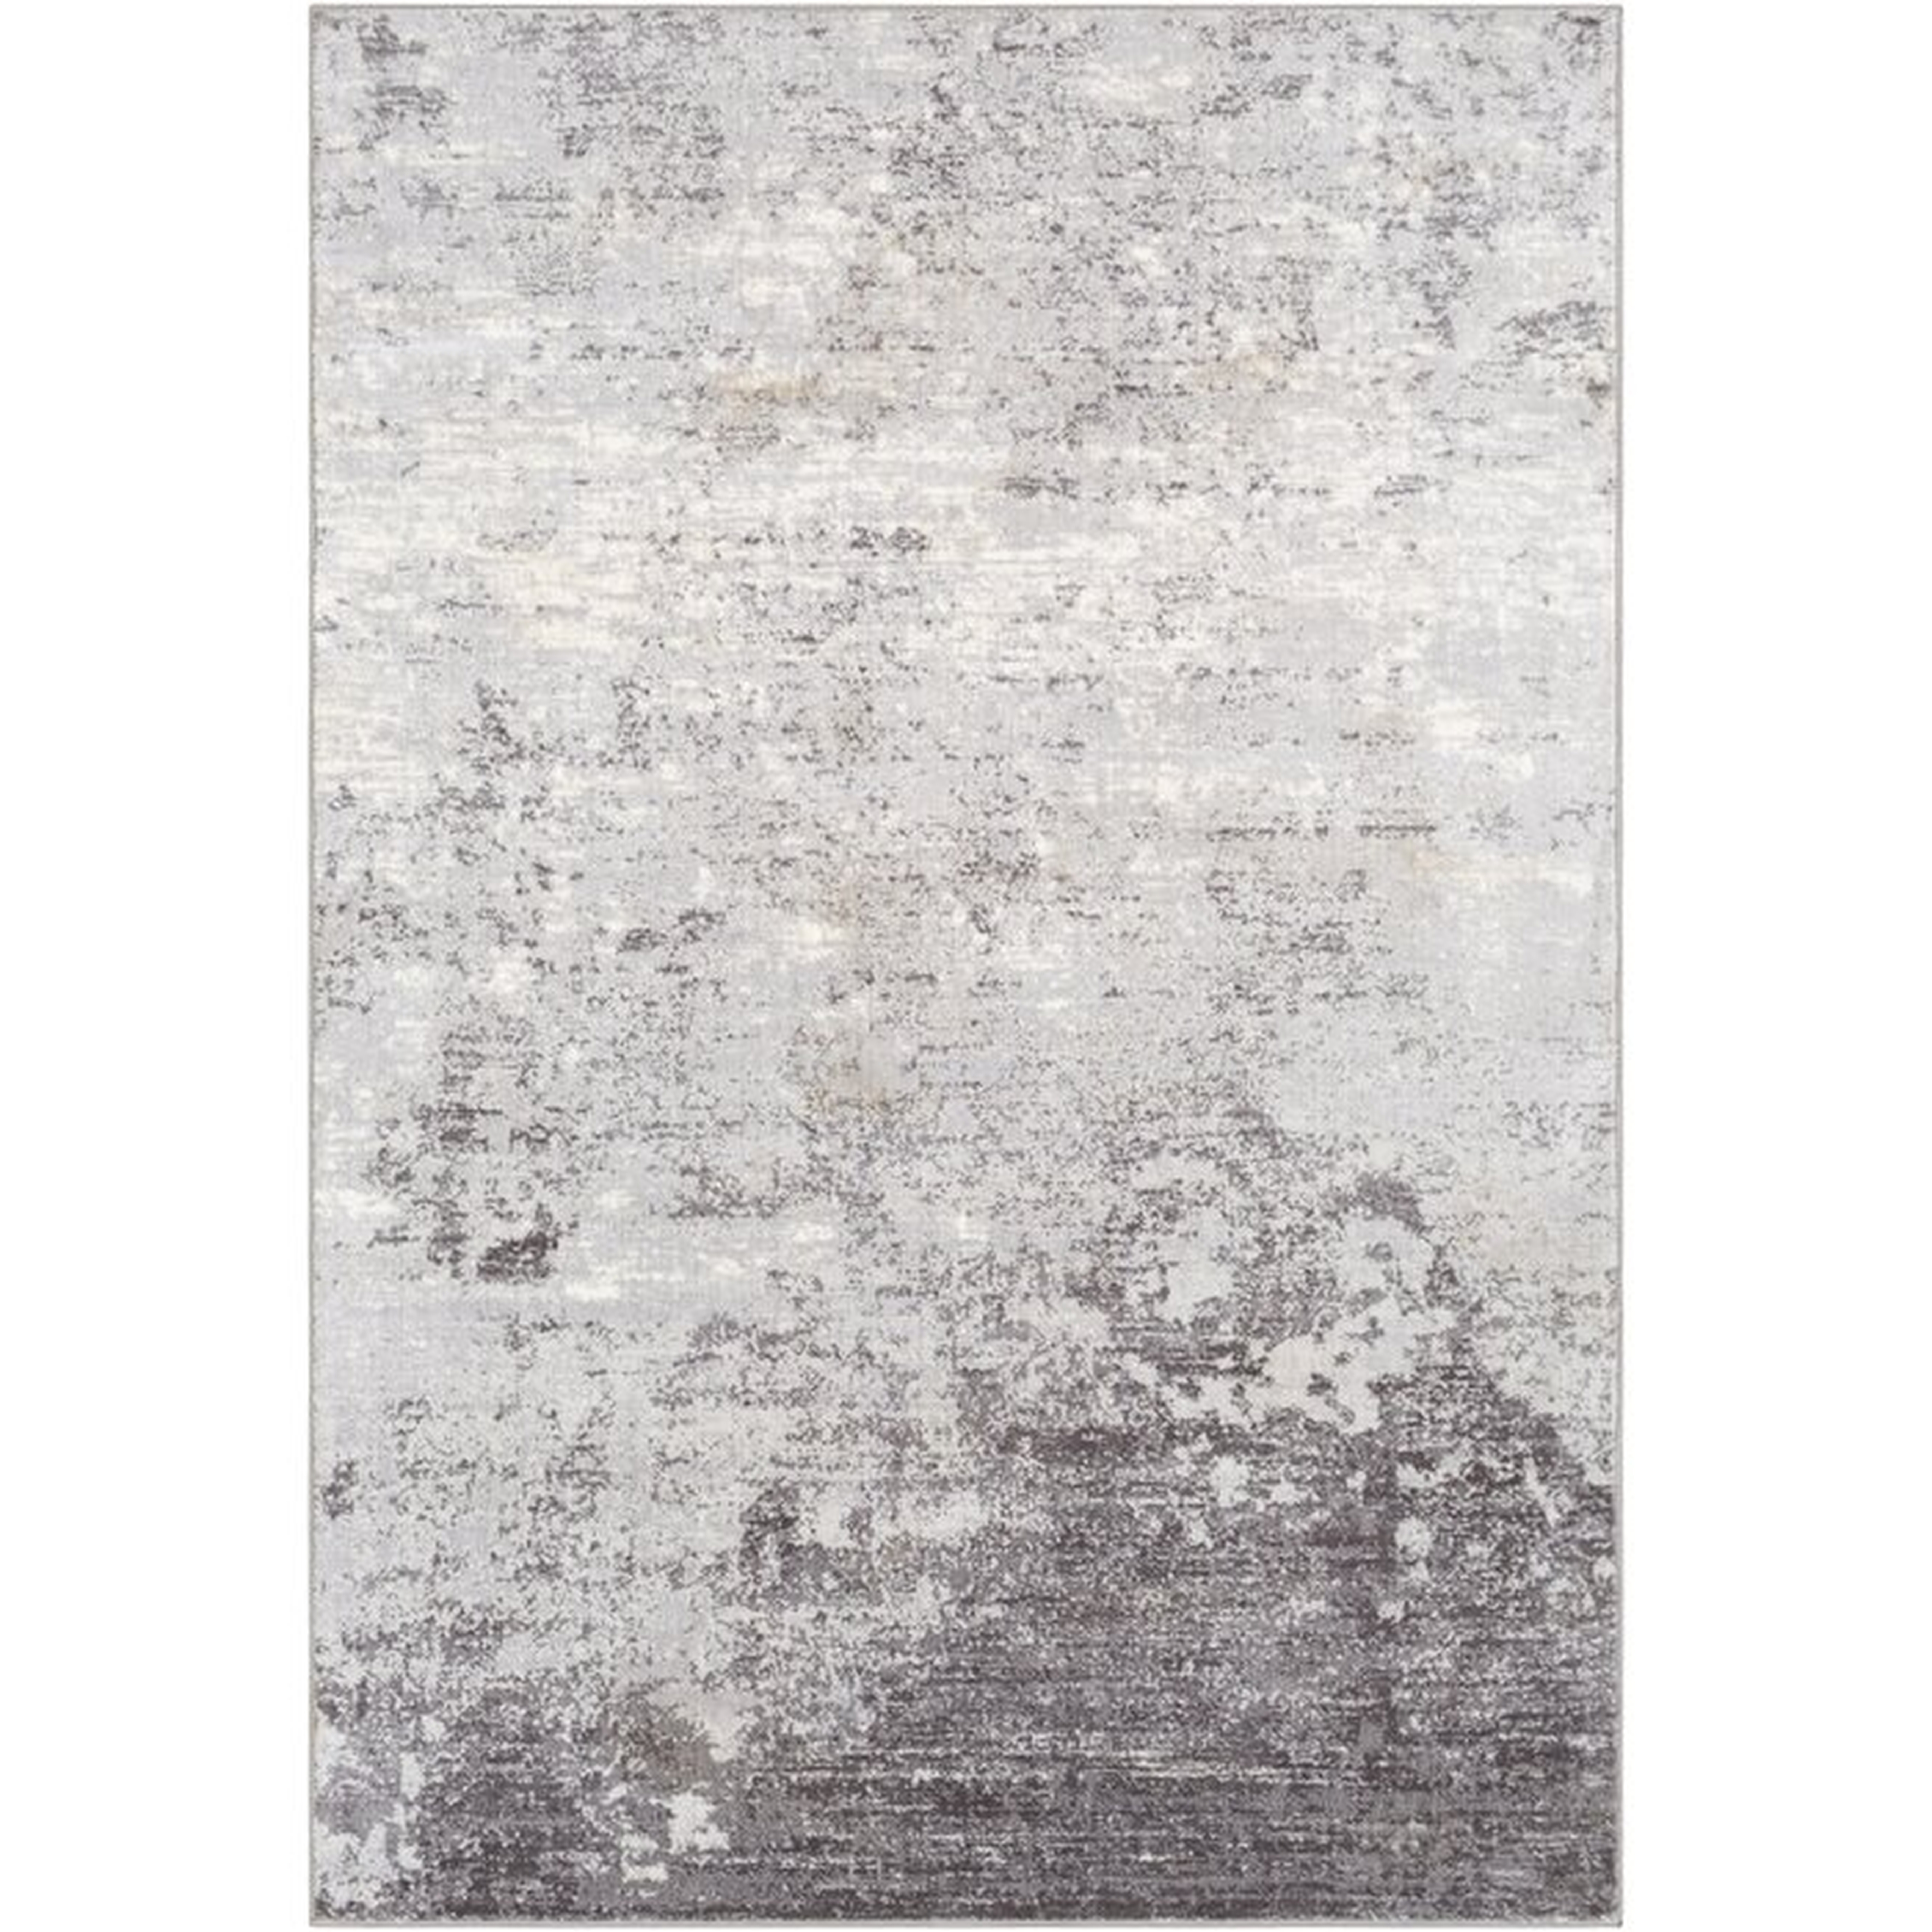 Rosson Abstract Silver/Gray/White Area Rug - Wayfair